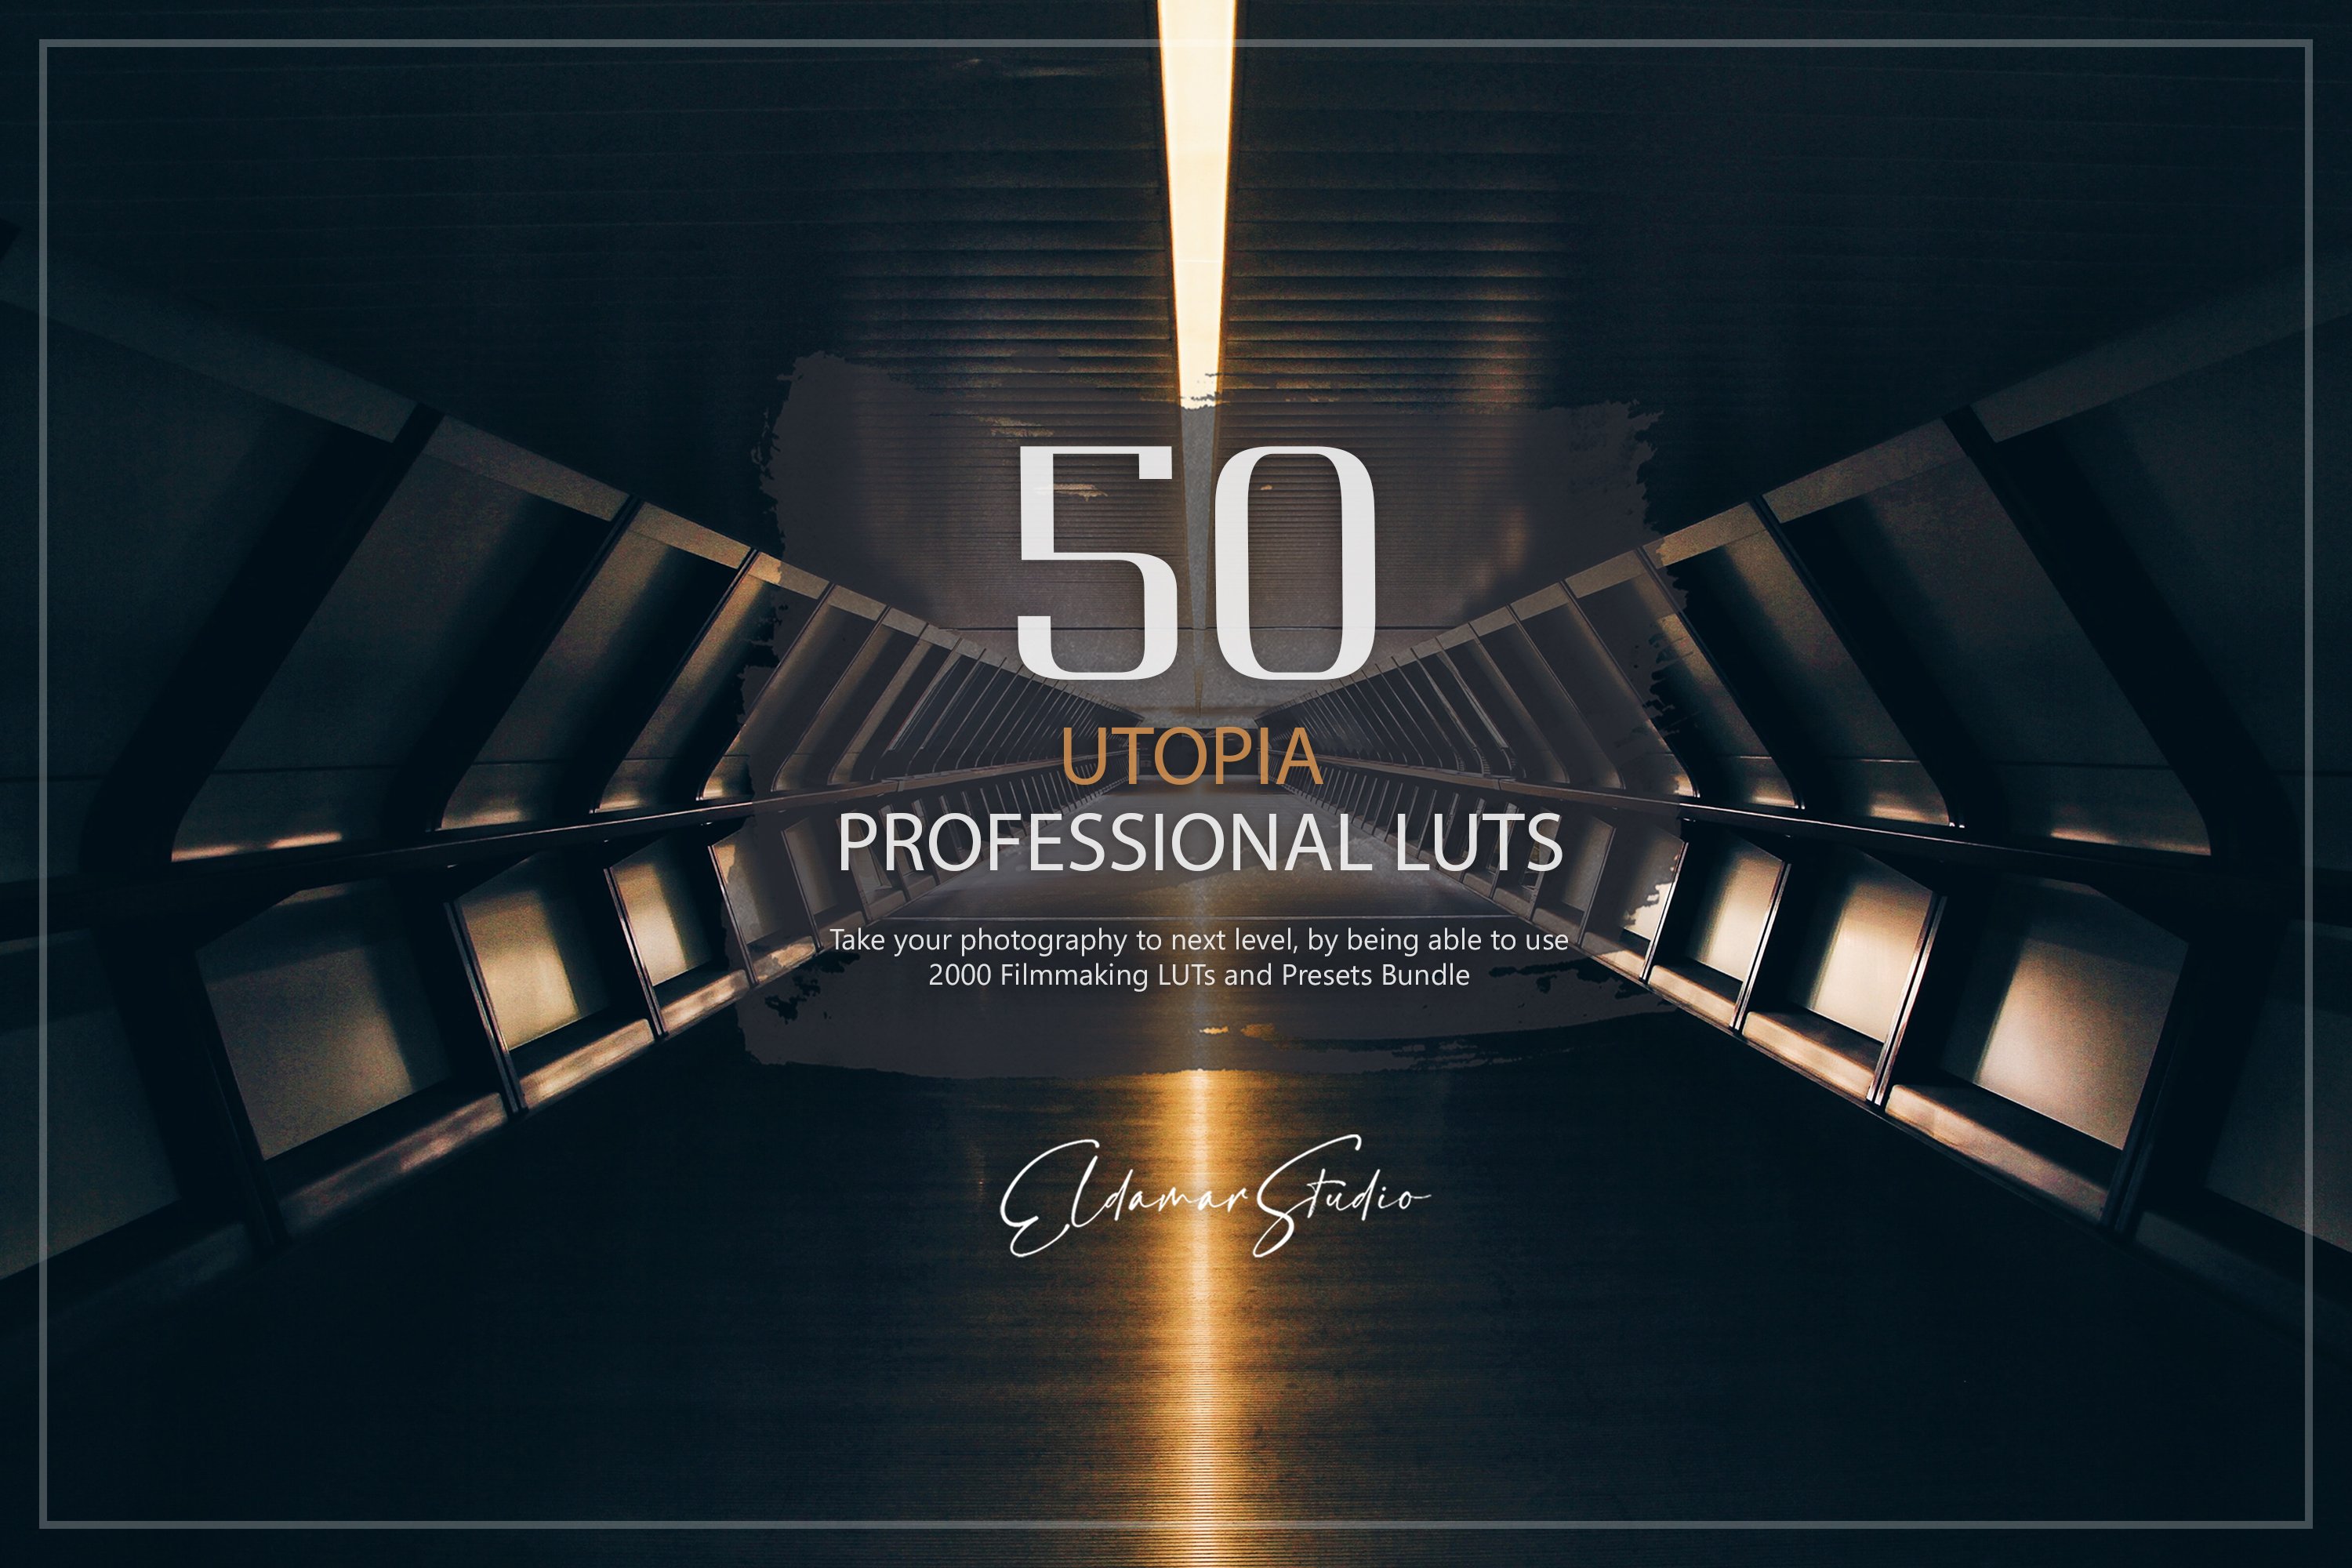 50 Utopia LUTs and Presets Packcover image.